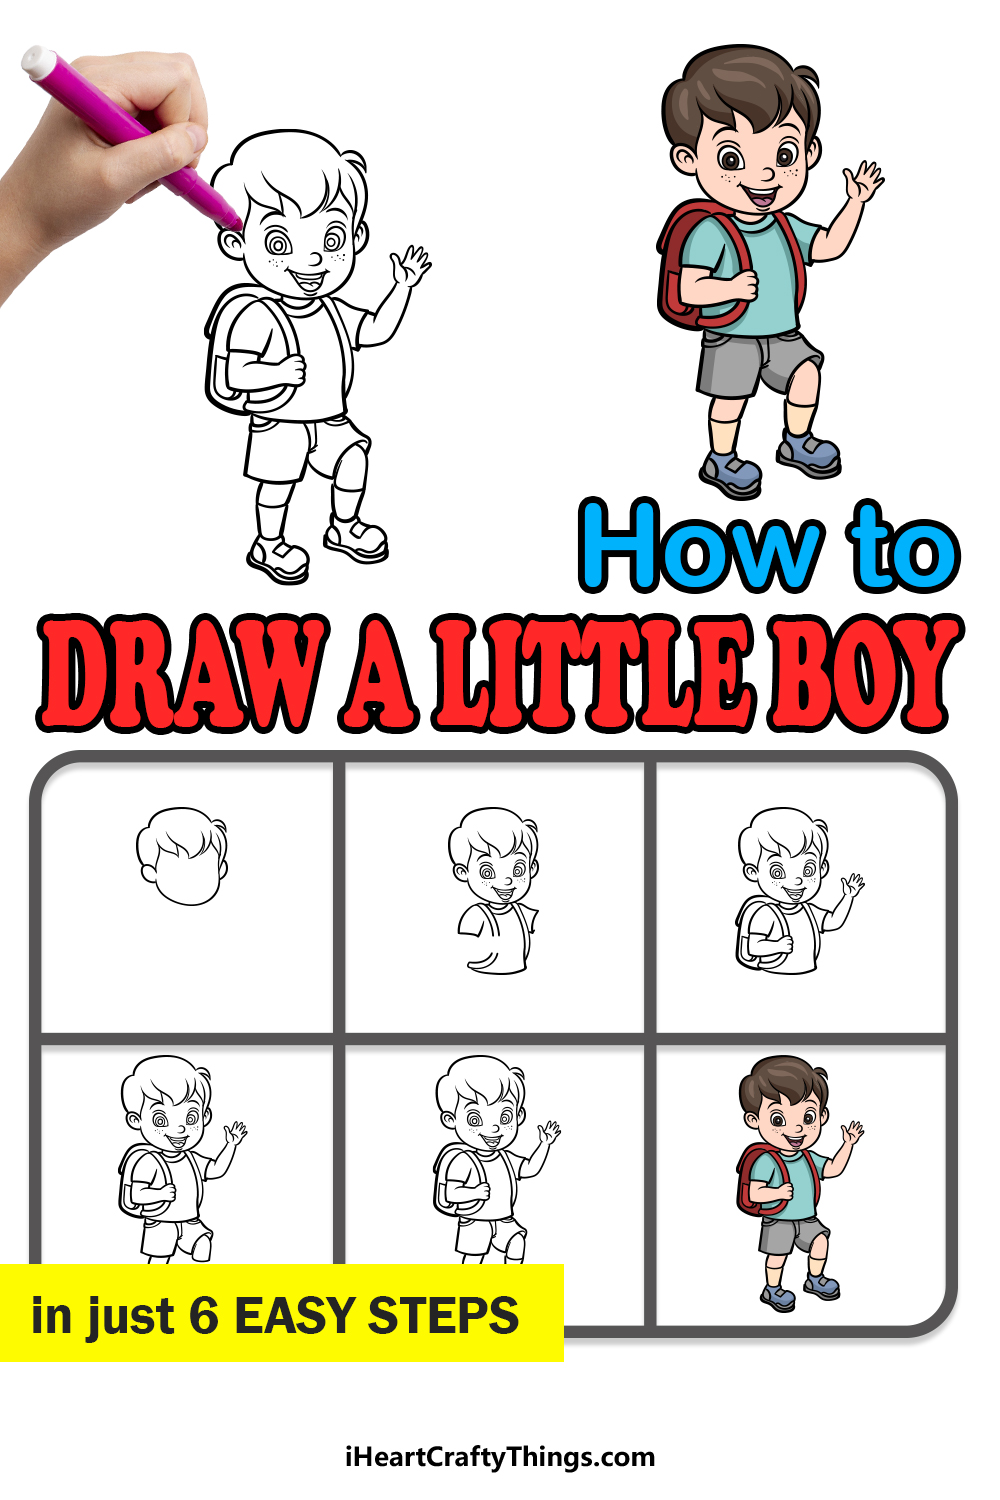 how to draw a Little Boy in 6 easy steps